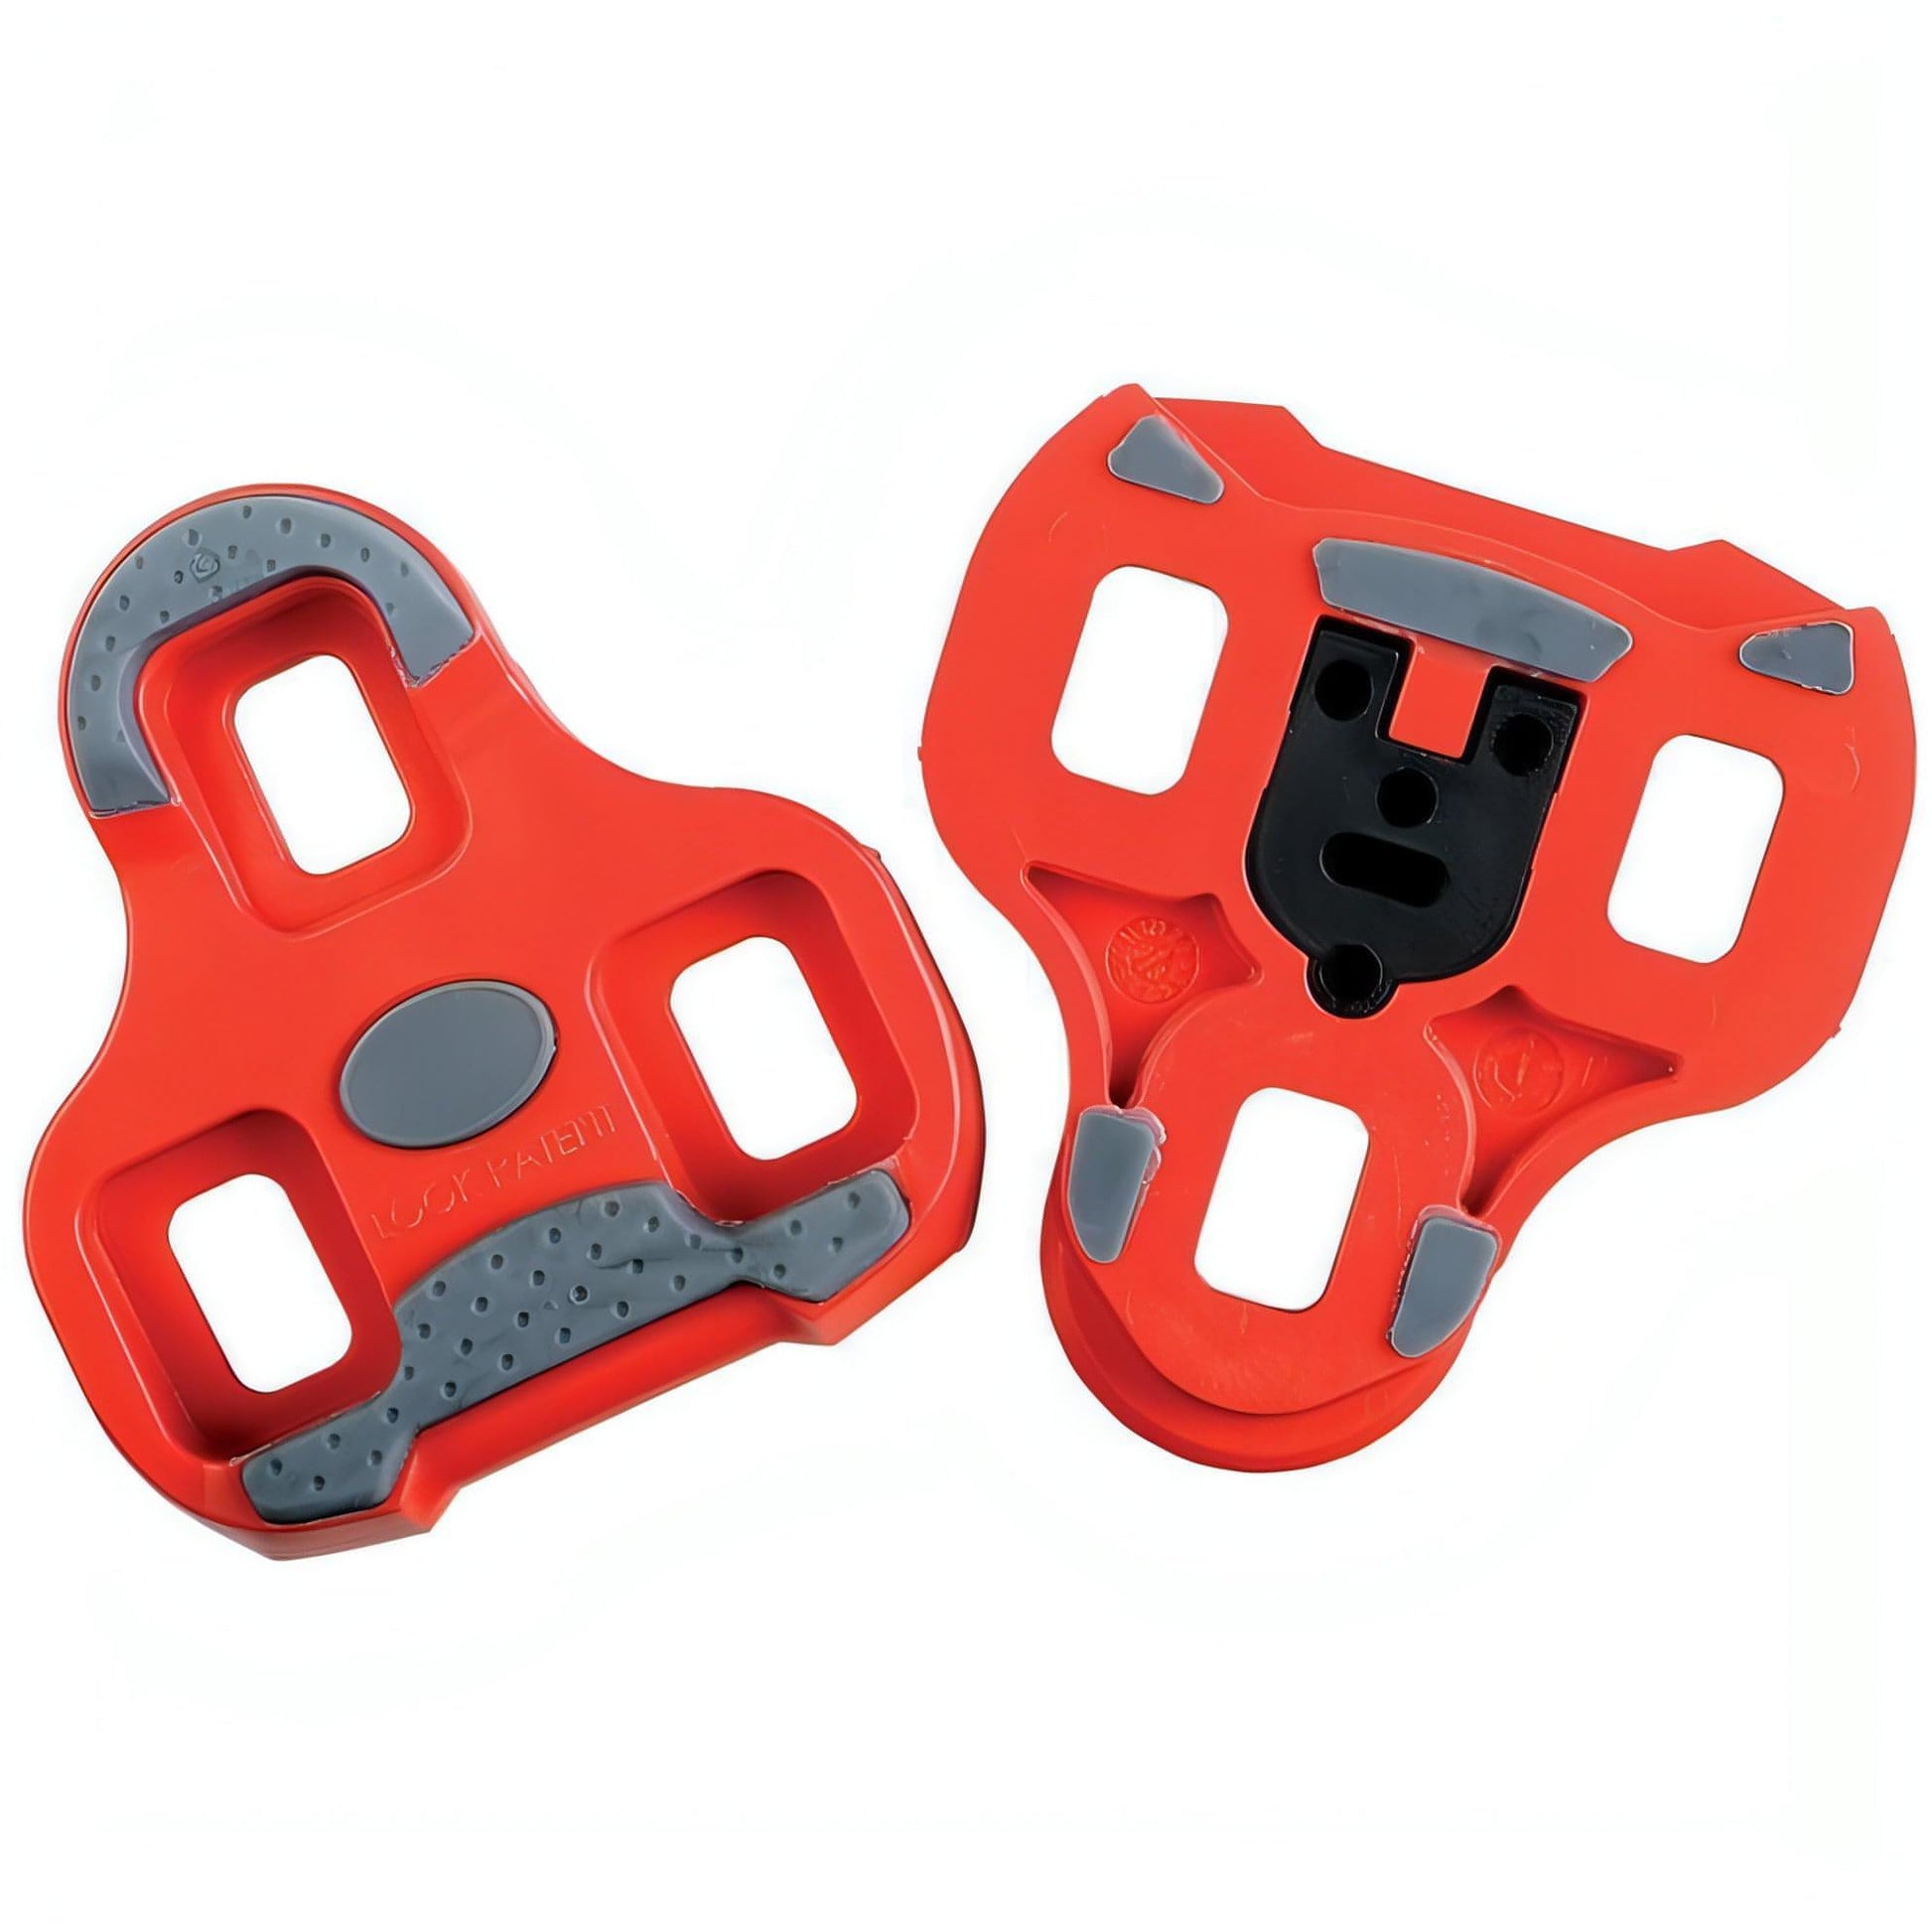 Look Keo Grip 9 Degree Float Cleat - Red 3611720061577 - Start Fitness